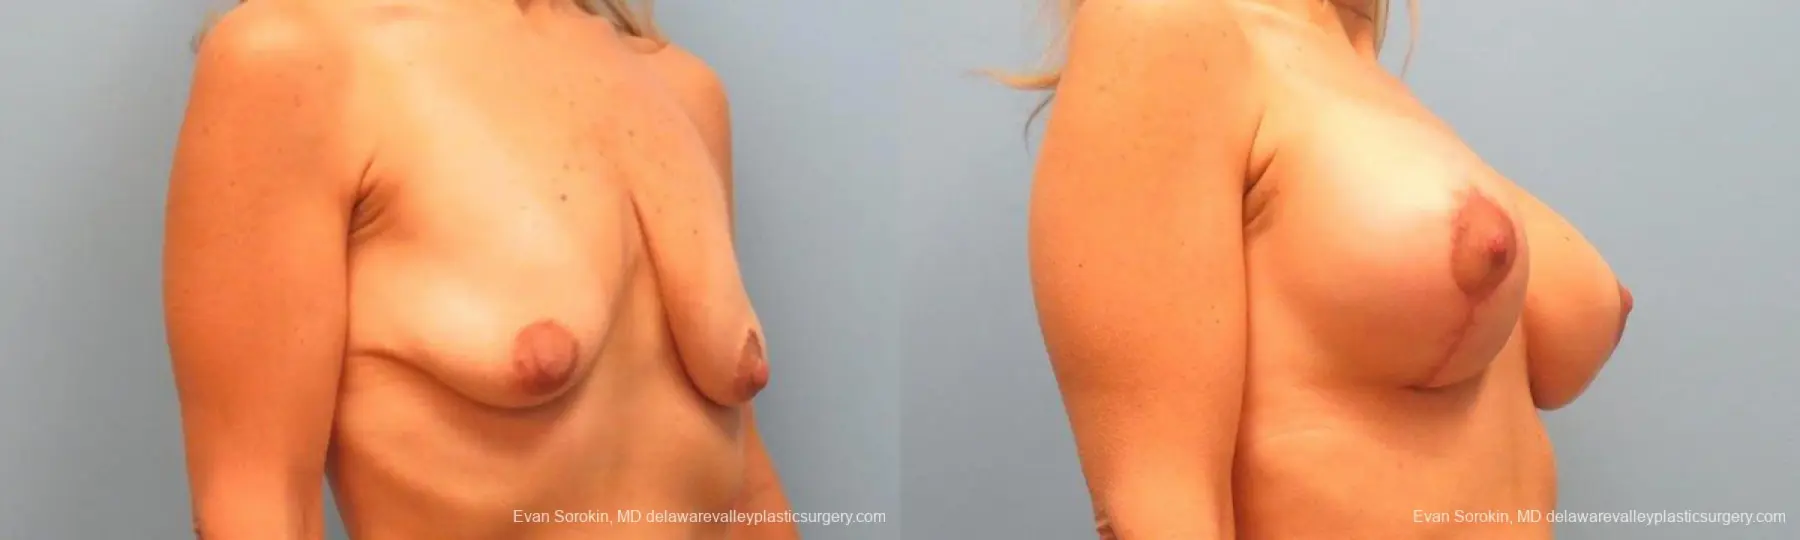 Philadelphia Breast Lift and Augmentation 9485 - Before and After 2